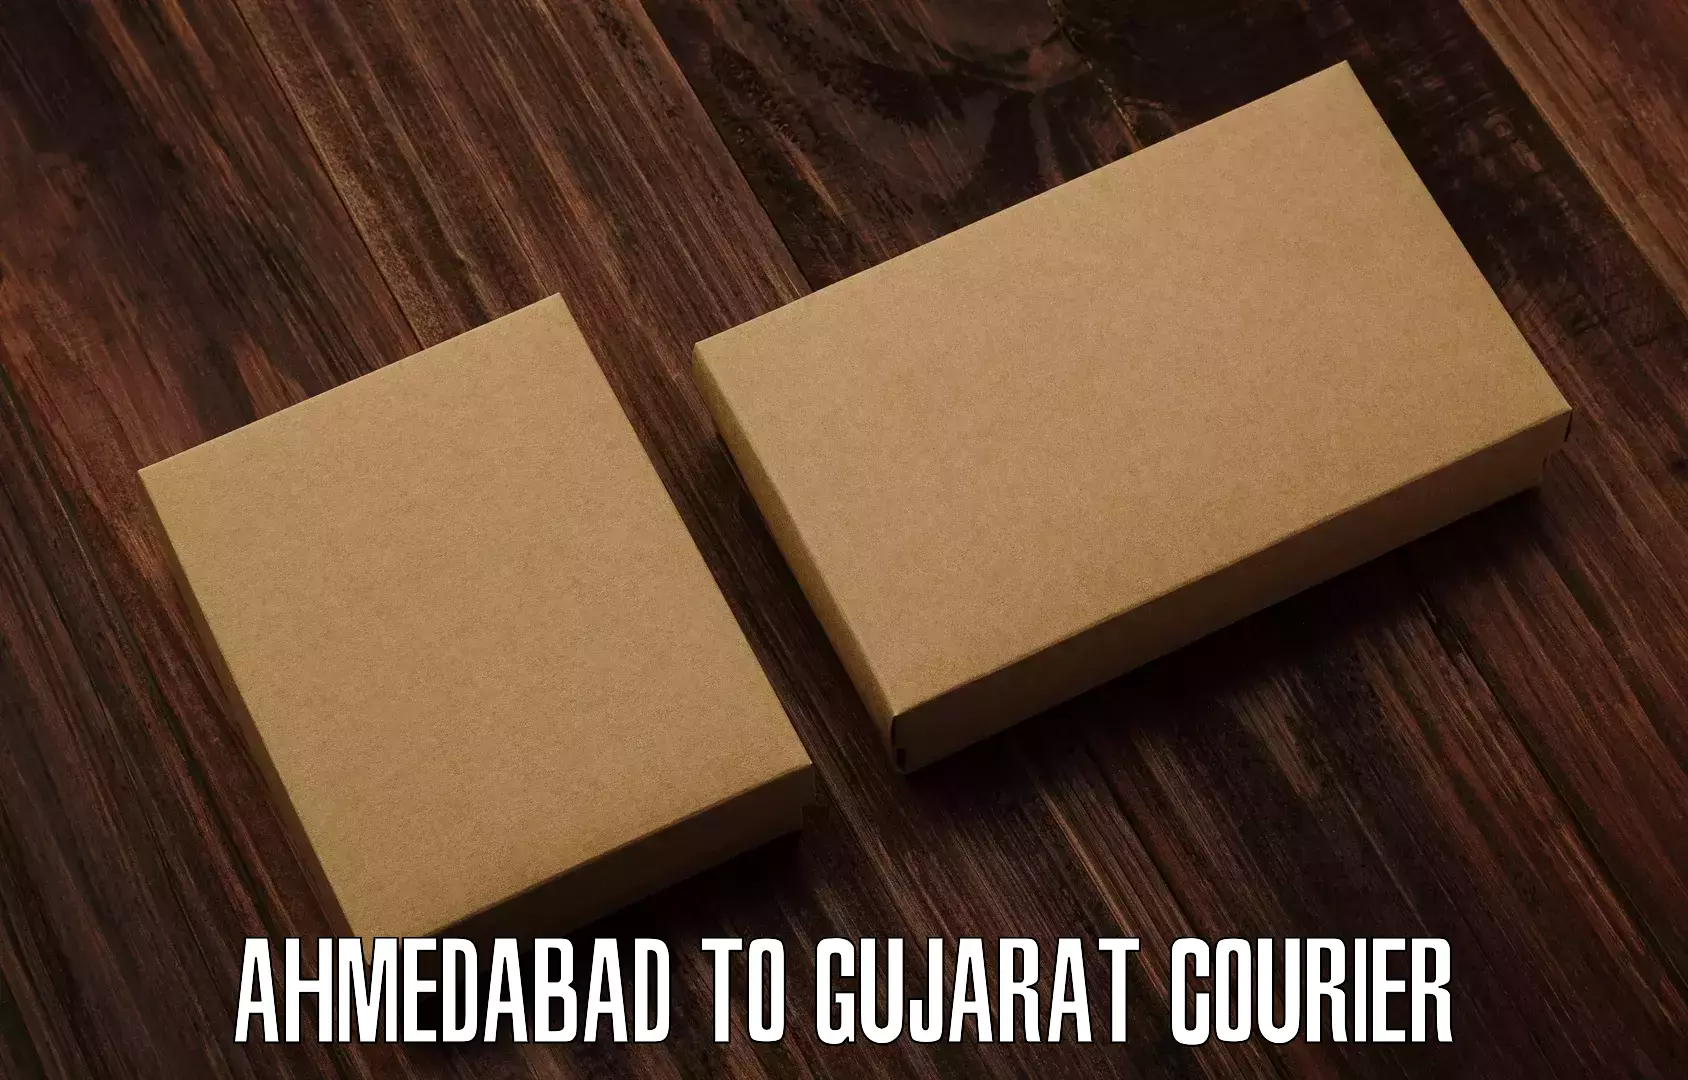 Global shipping networks Ahmedabad to Gujarat